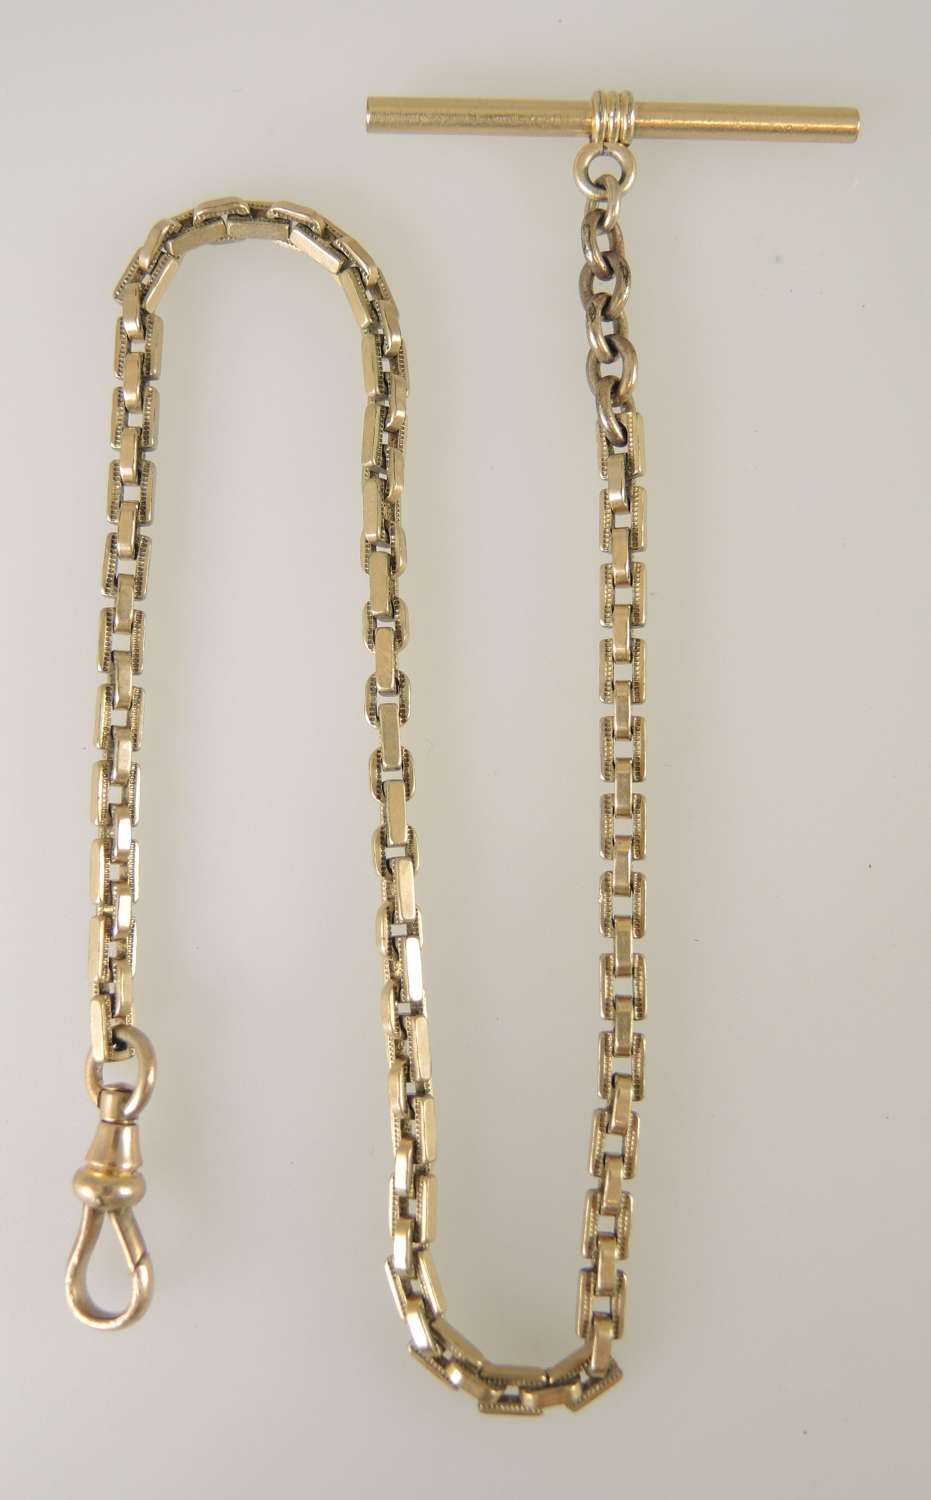 Vintage gold plated watch chain c1890